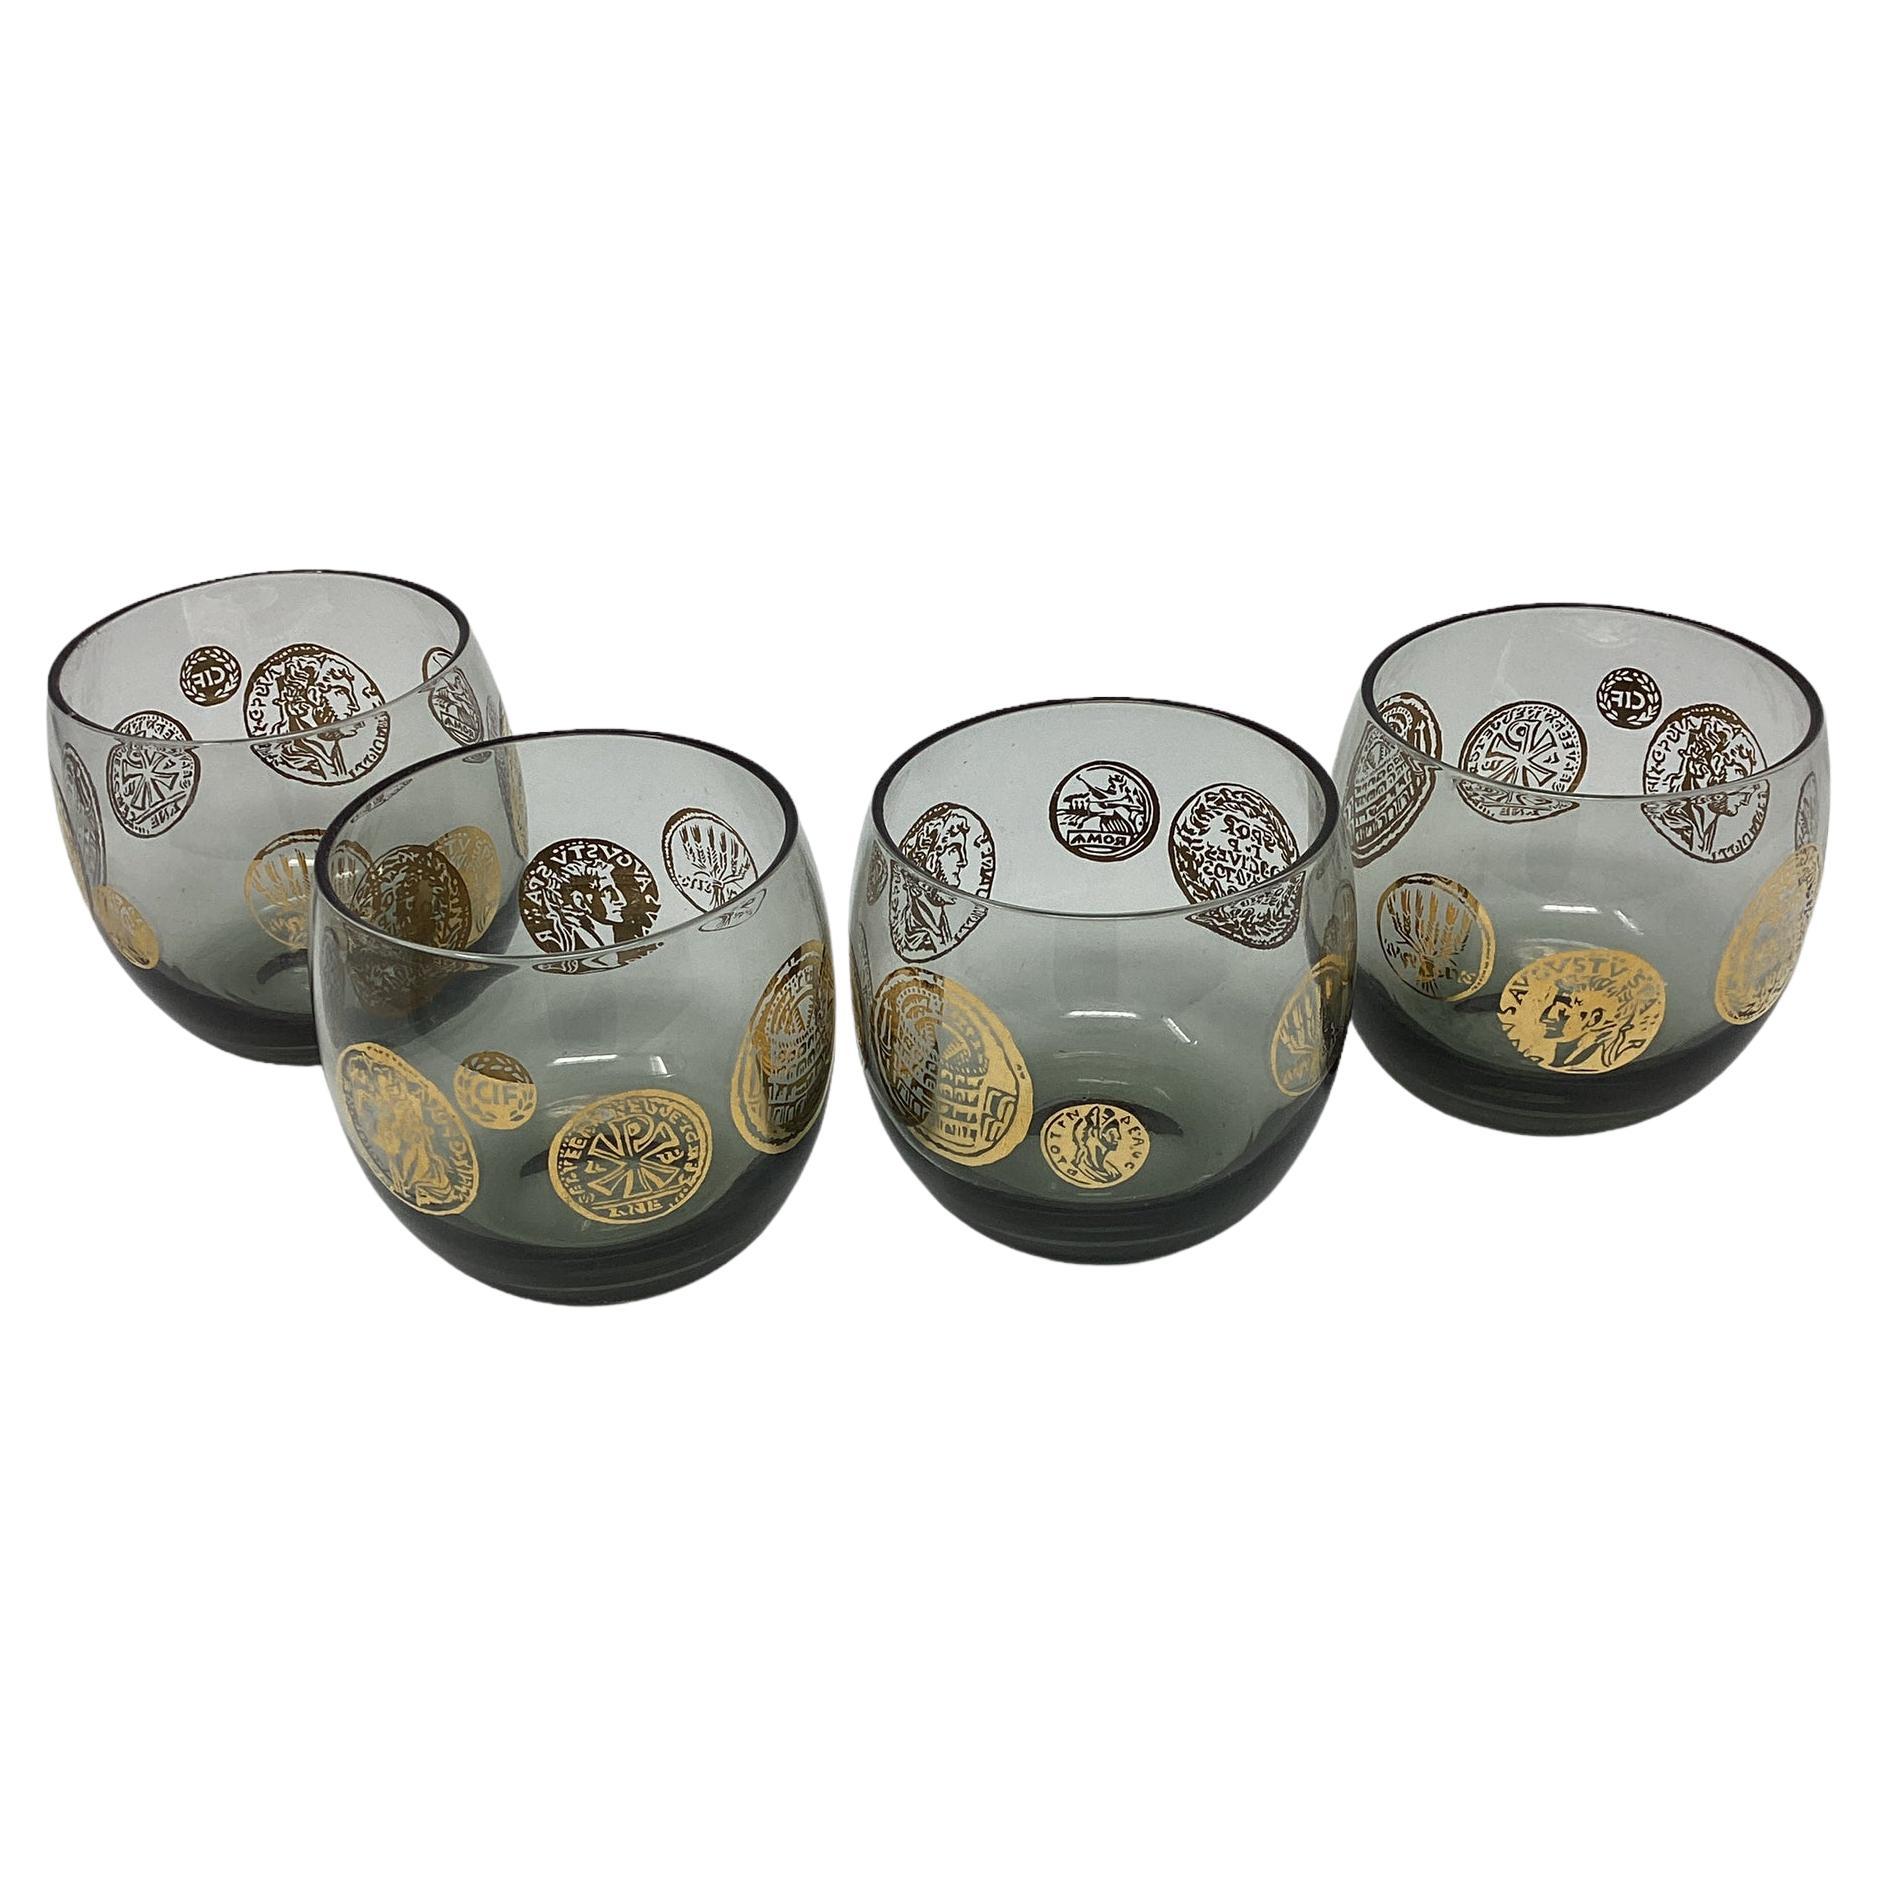 https://a.1stdibscdn.com/set-of-4-smoke-roly-poly-cocktail-glasses-with-roman-insignias-for-sale/f_73712/f_360766621694203533464/f_36076662_1694203533986_bg_processed.jpg